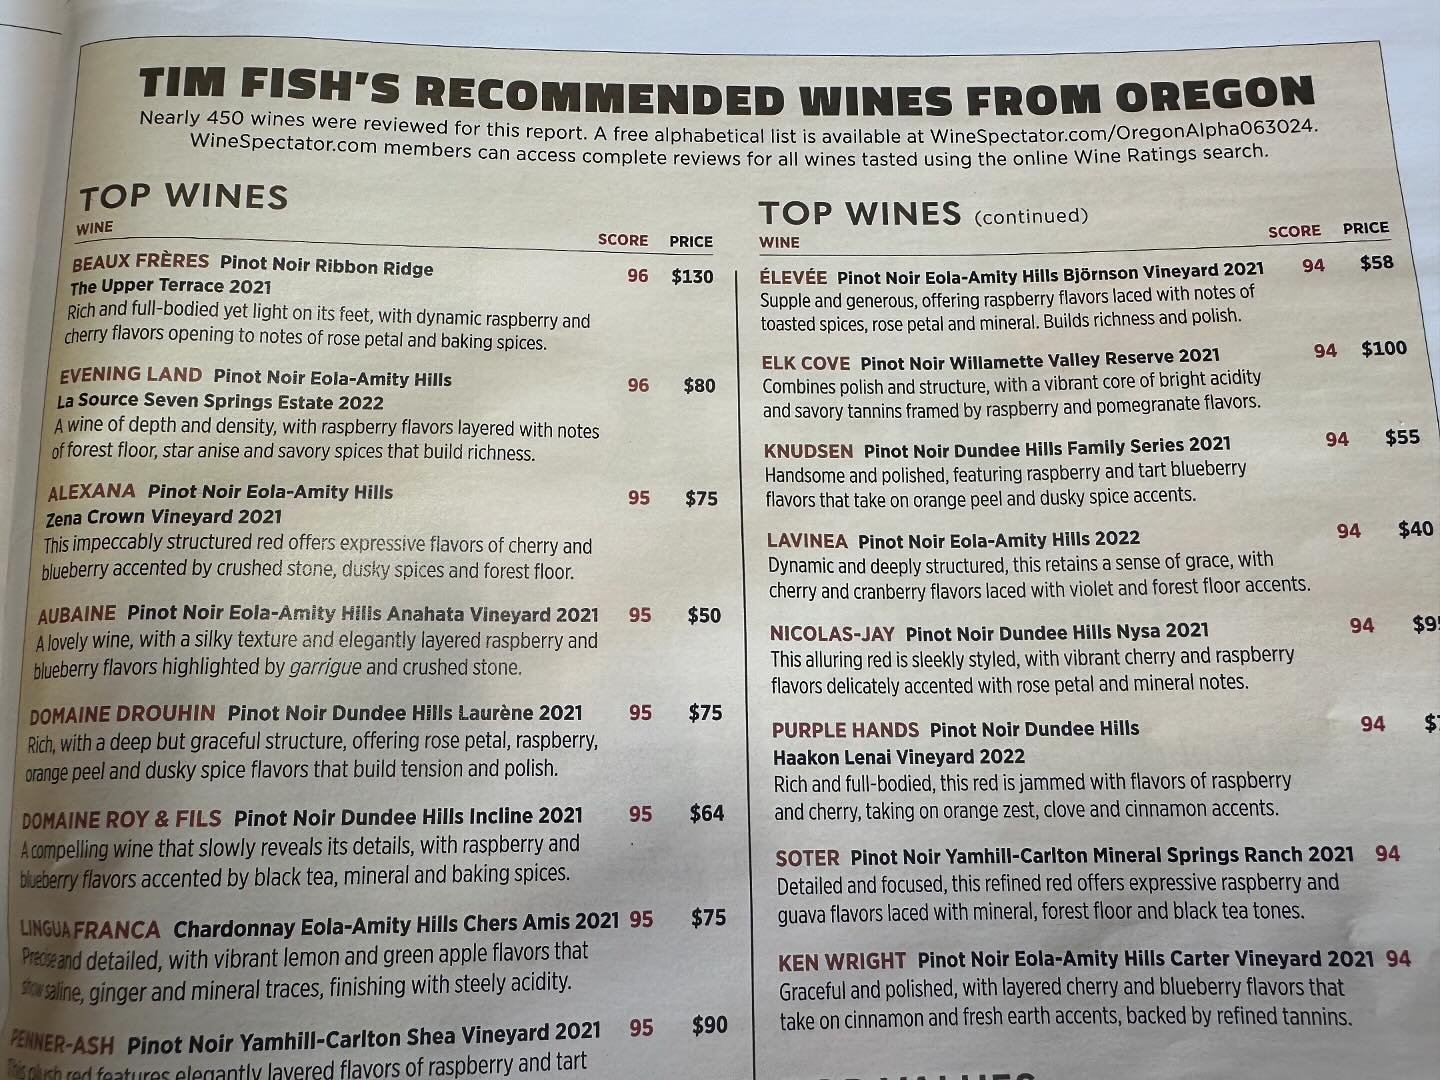 Thank you @timfish_wine and @wine_spectator for recognizing @purple.hands.winery 2022 Haakon Lenai vineyard designated Pinot noir as one of the top recommended wines from Oregon.